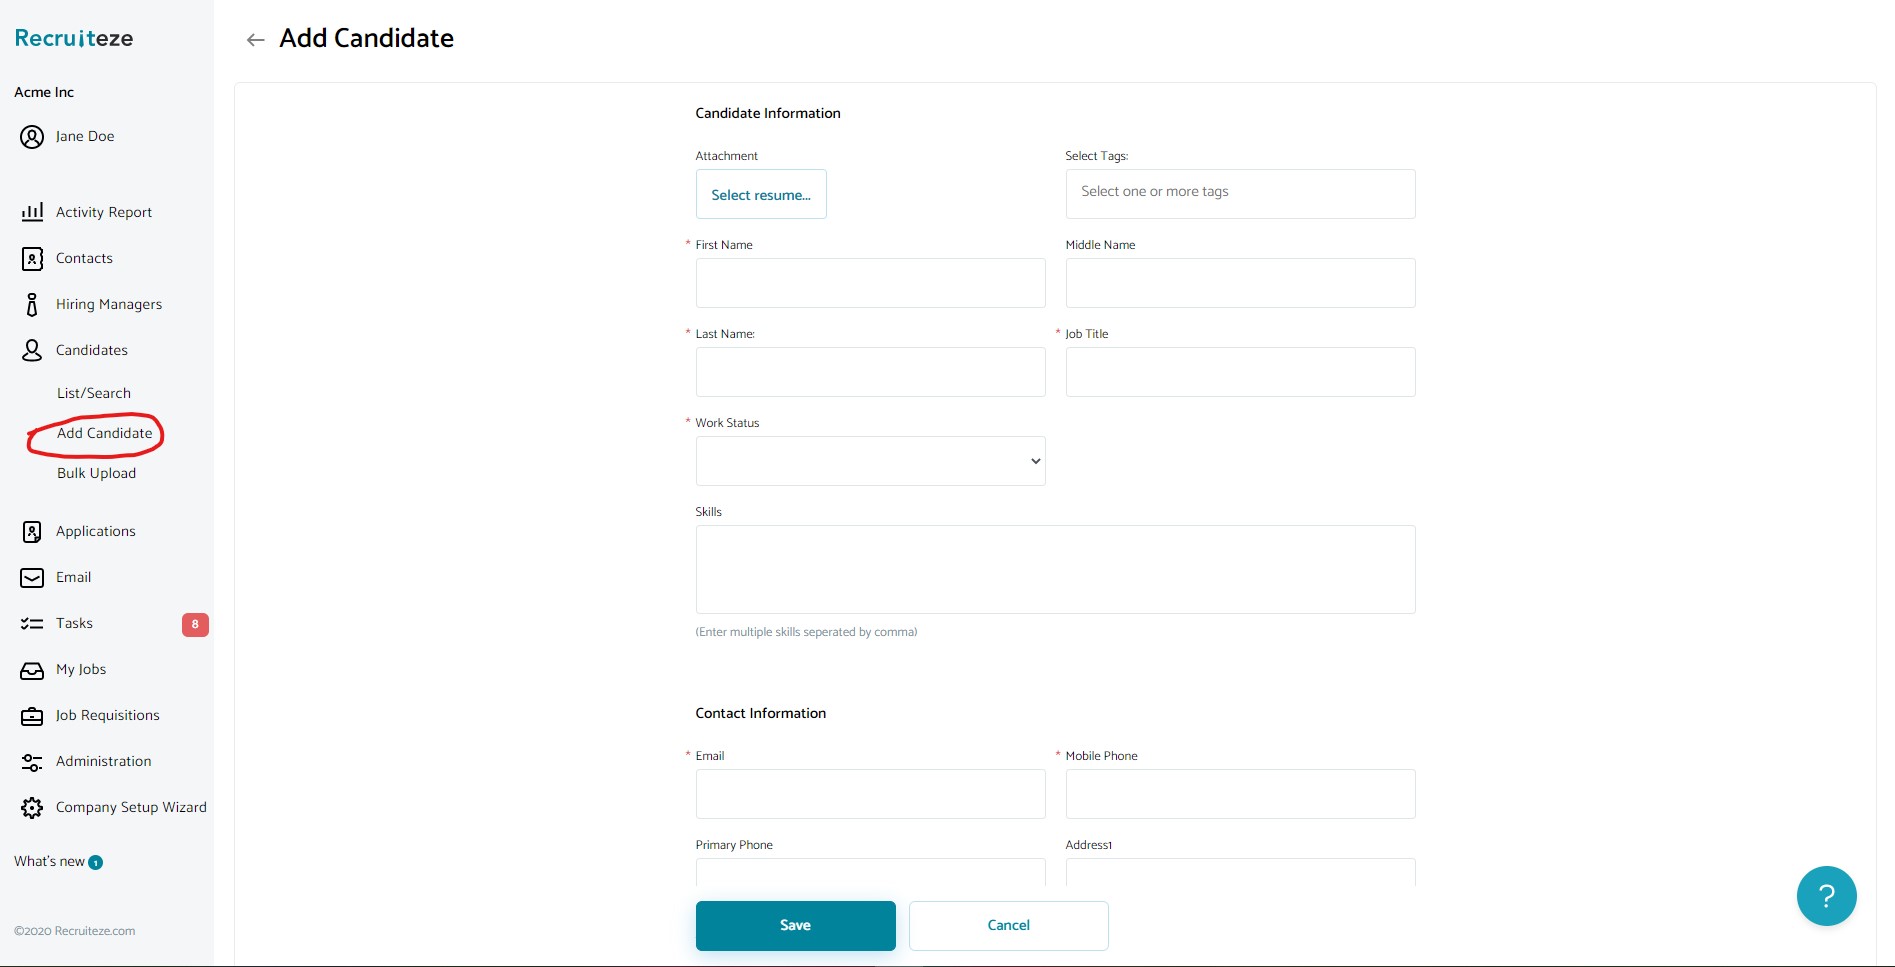 Applicant Tracking System: Add Candidate View